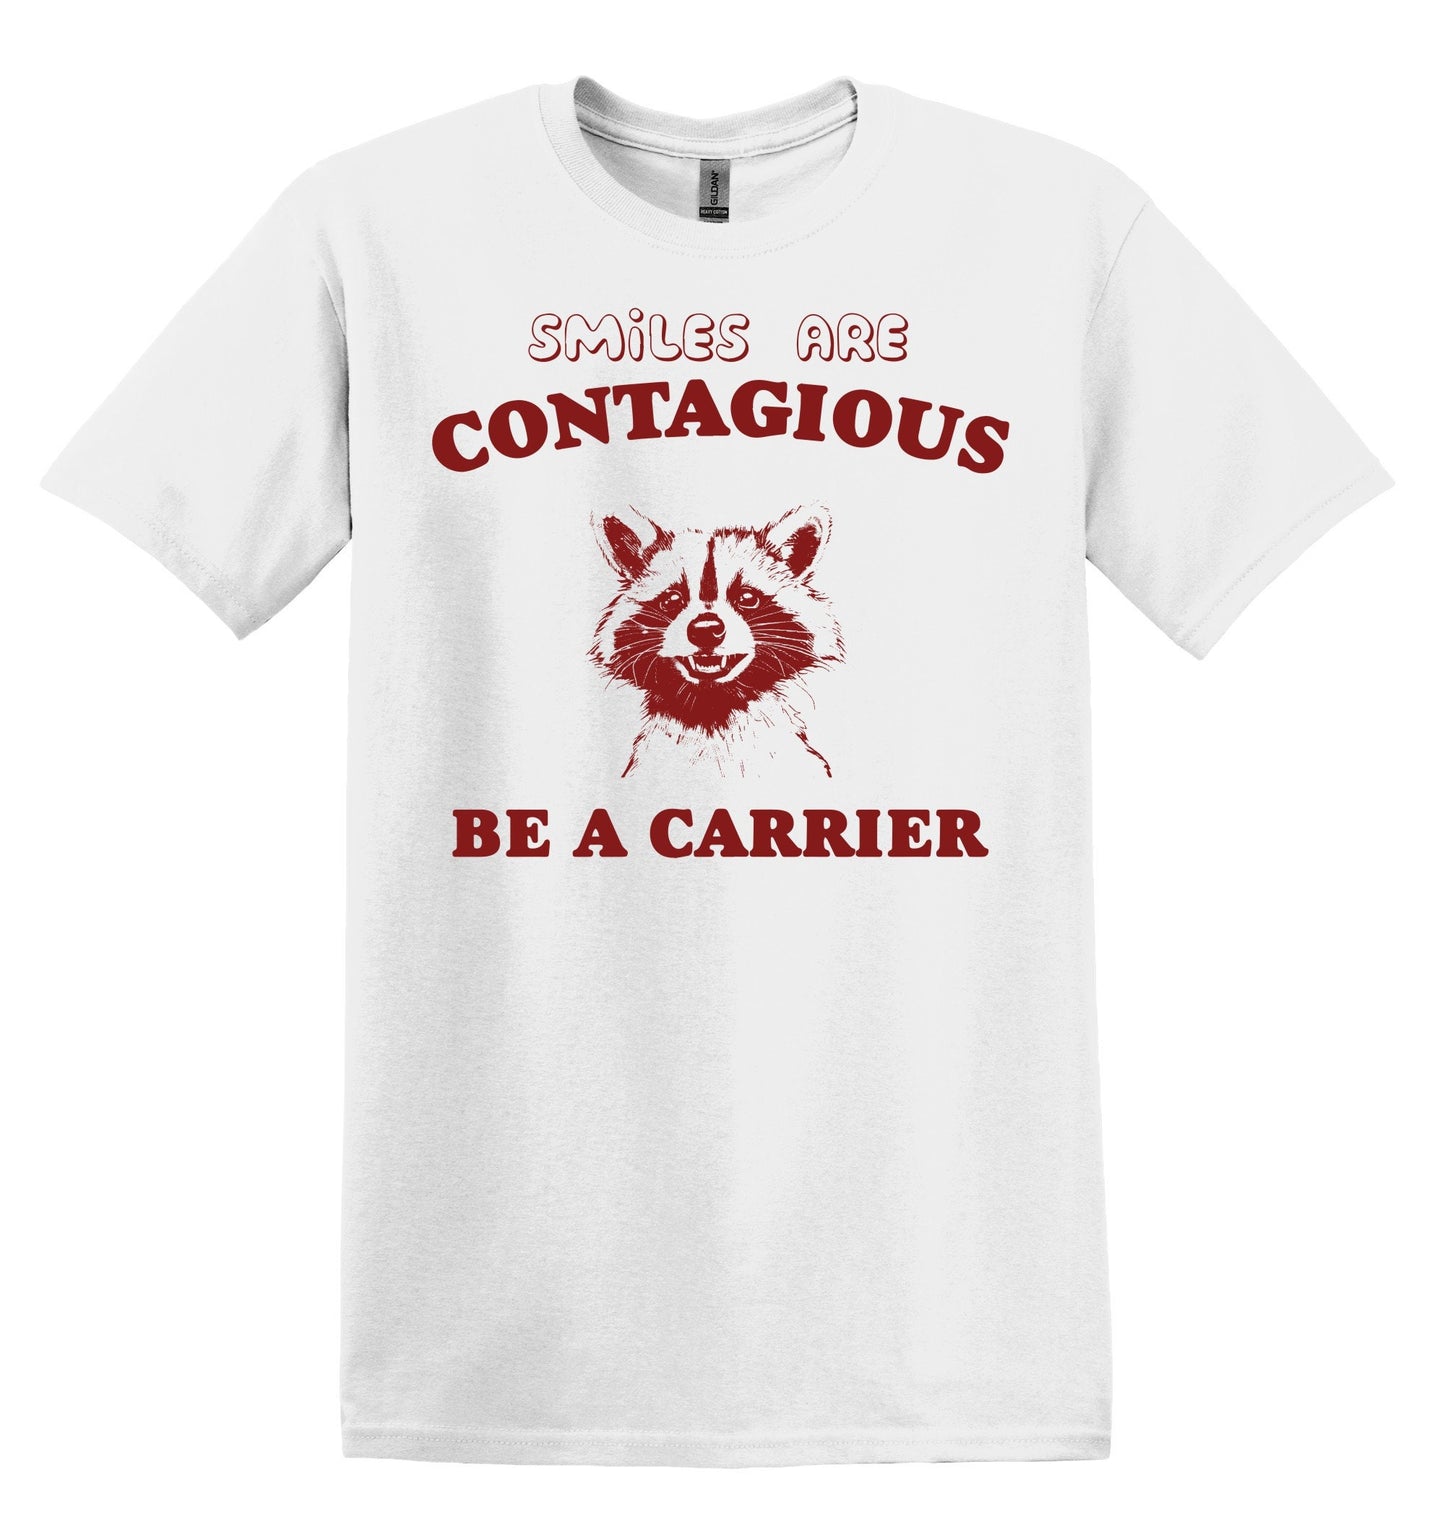 Smiles are Contagious Be a Carrier Raccoon Shirt Graphic Shirt Funny Vintage Adult Funny Shirt Nostalgia Shirt Cotton Shirt Minimalist Shirt